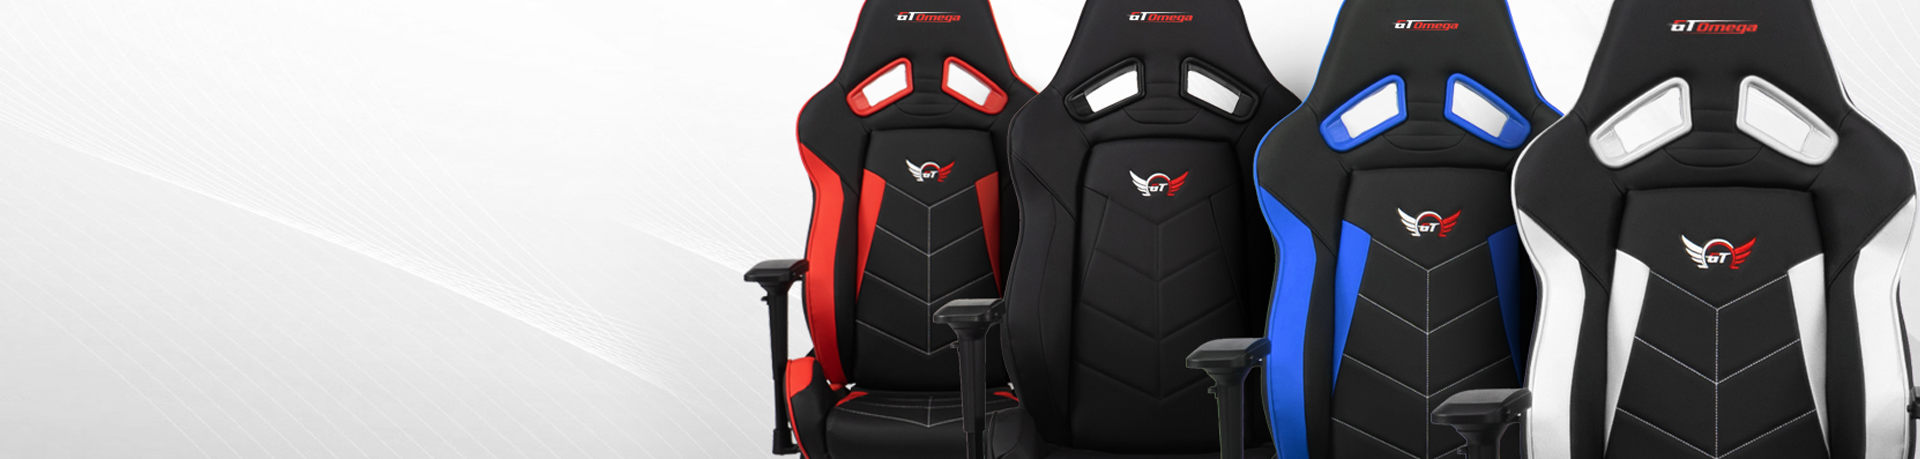 GT Omega Elite Series Gaming chair colour range, Black, White, Red and Blue